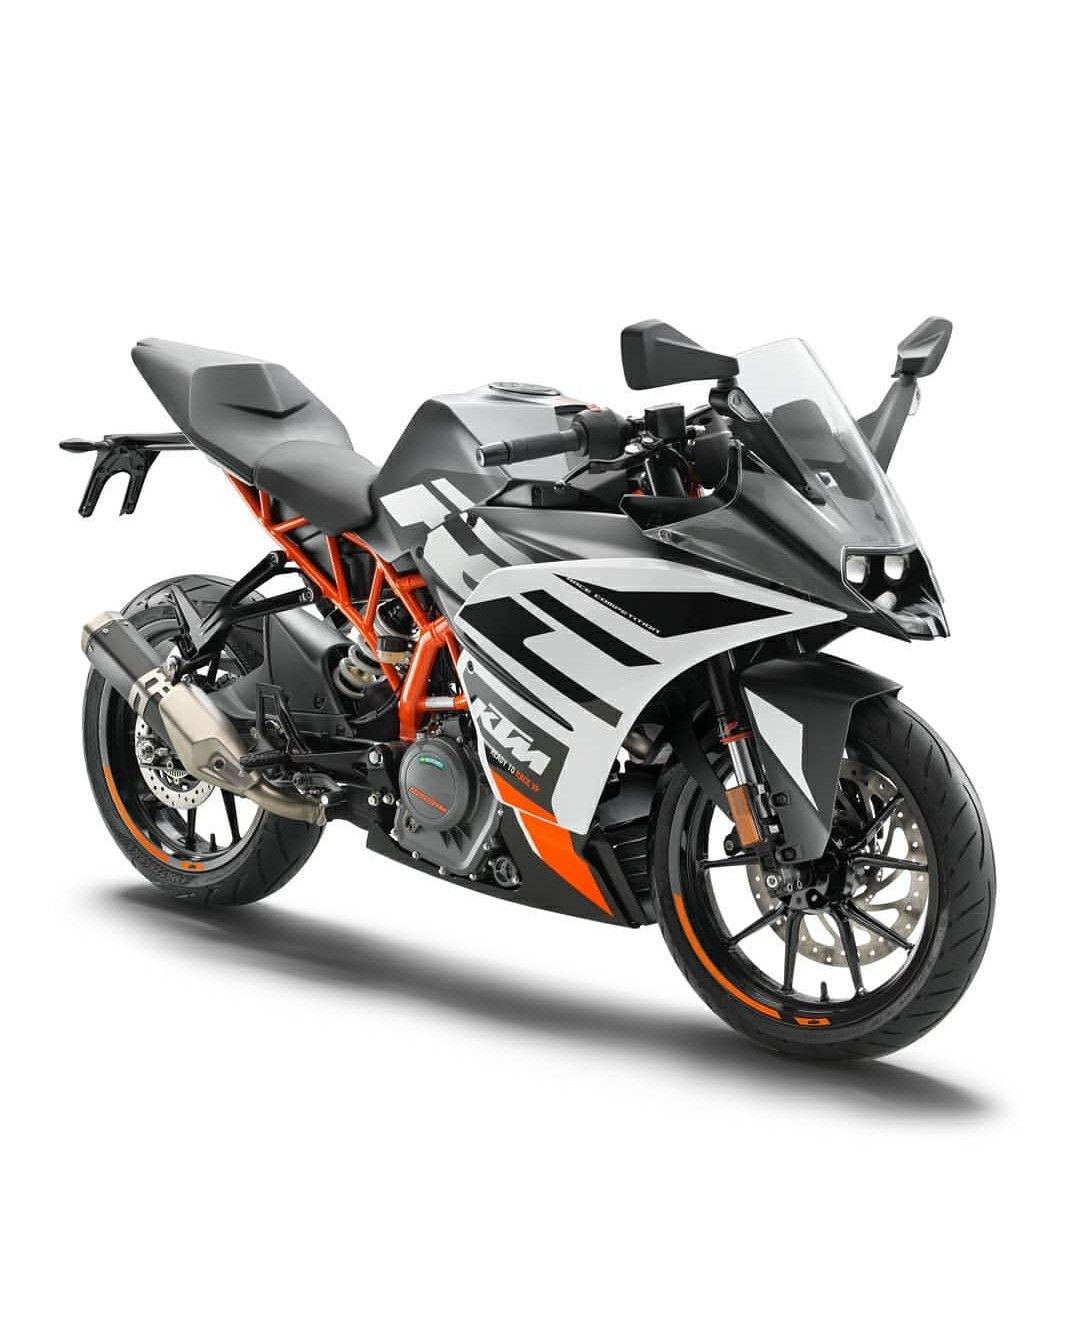 BS6 KTM RC 390 - Specification, Mileage, Price, Competitors